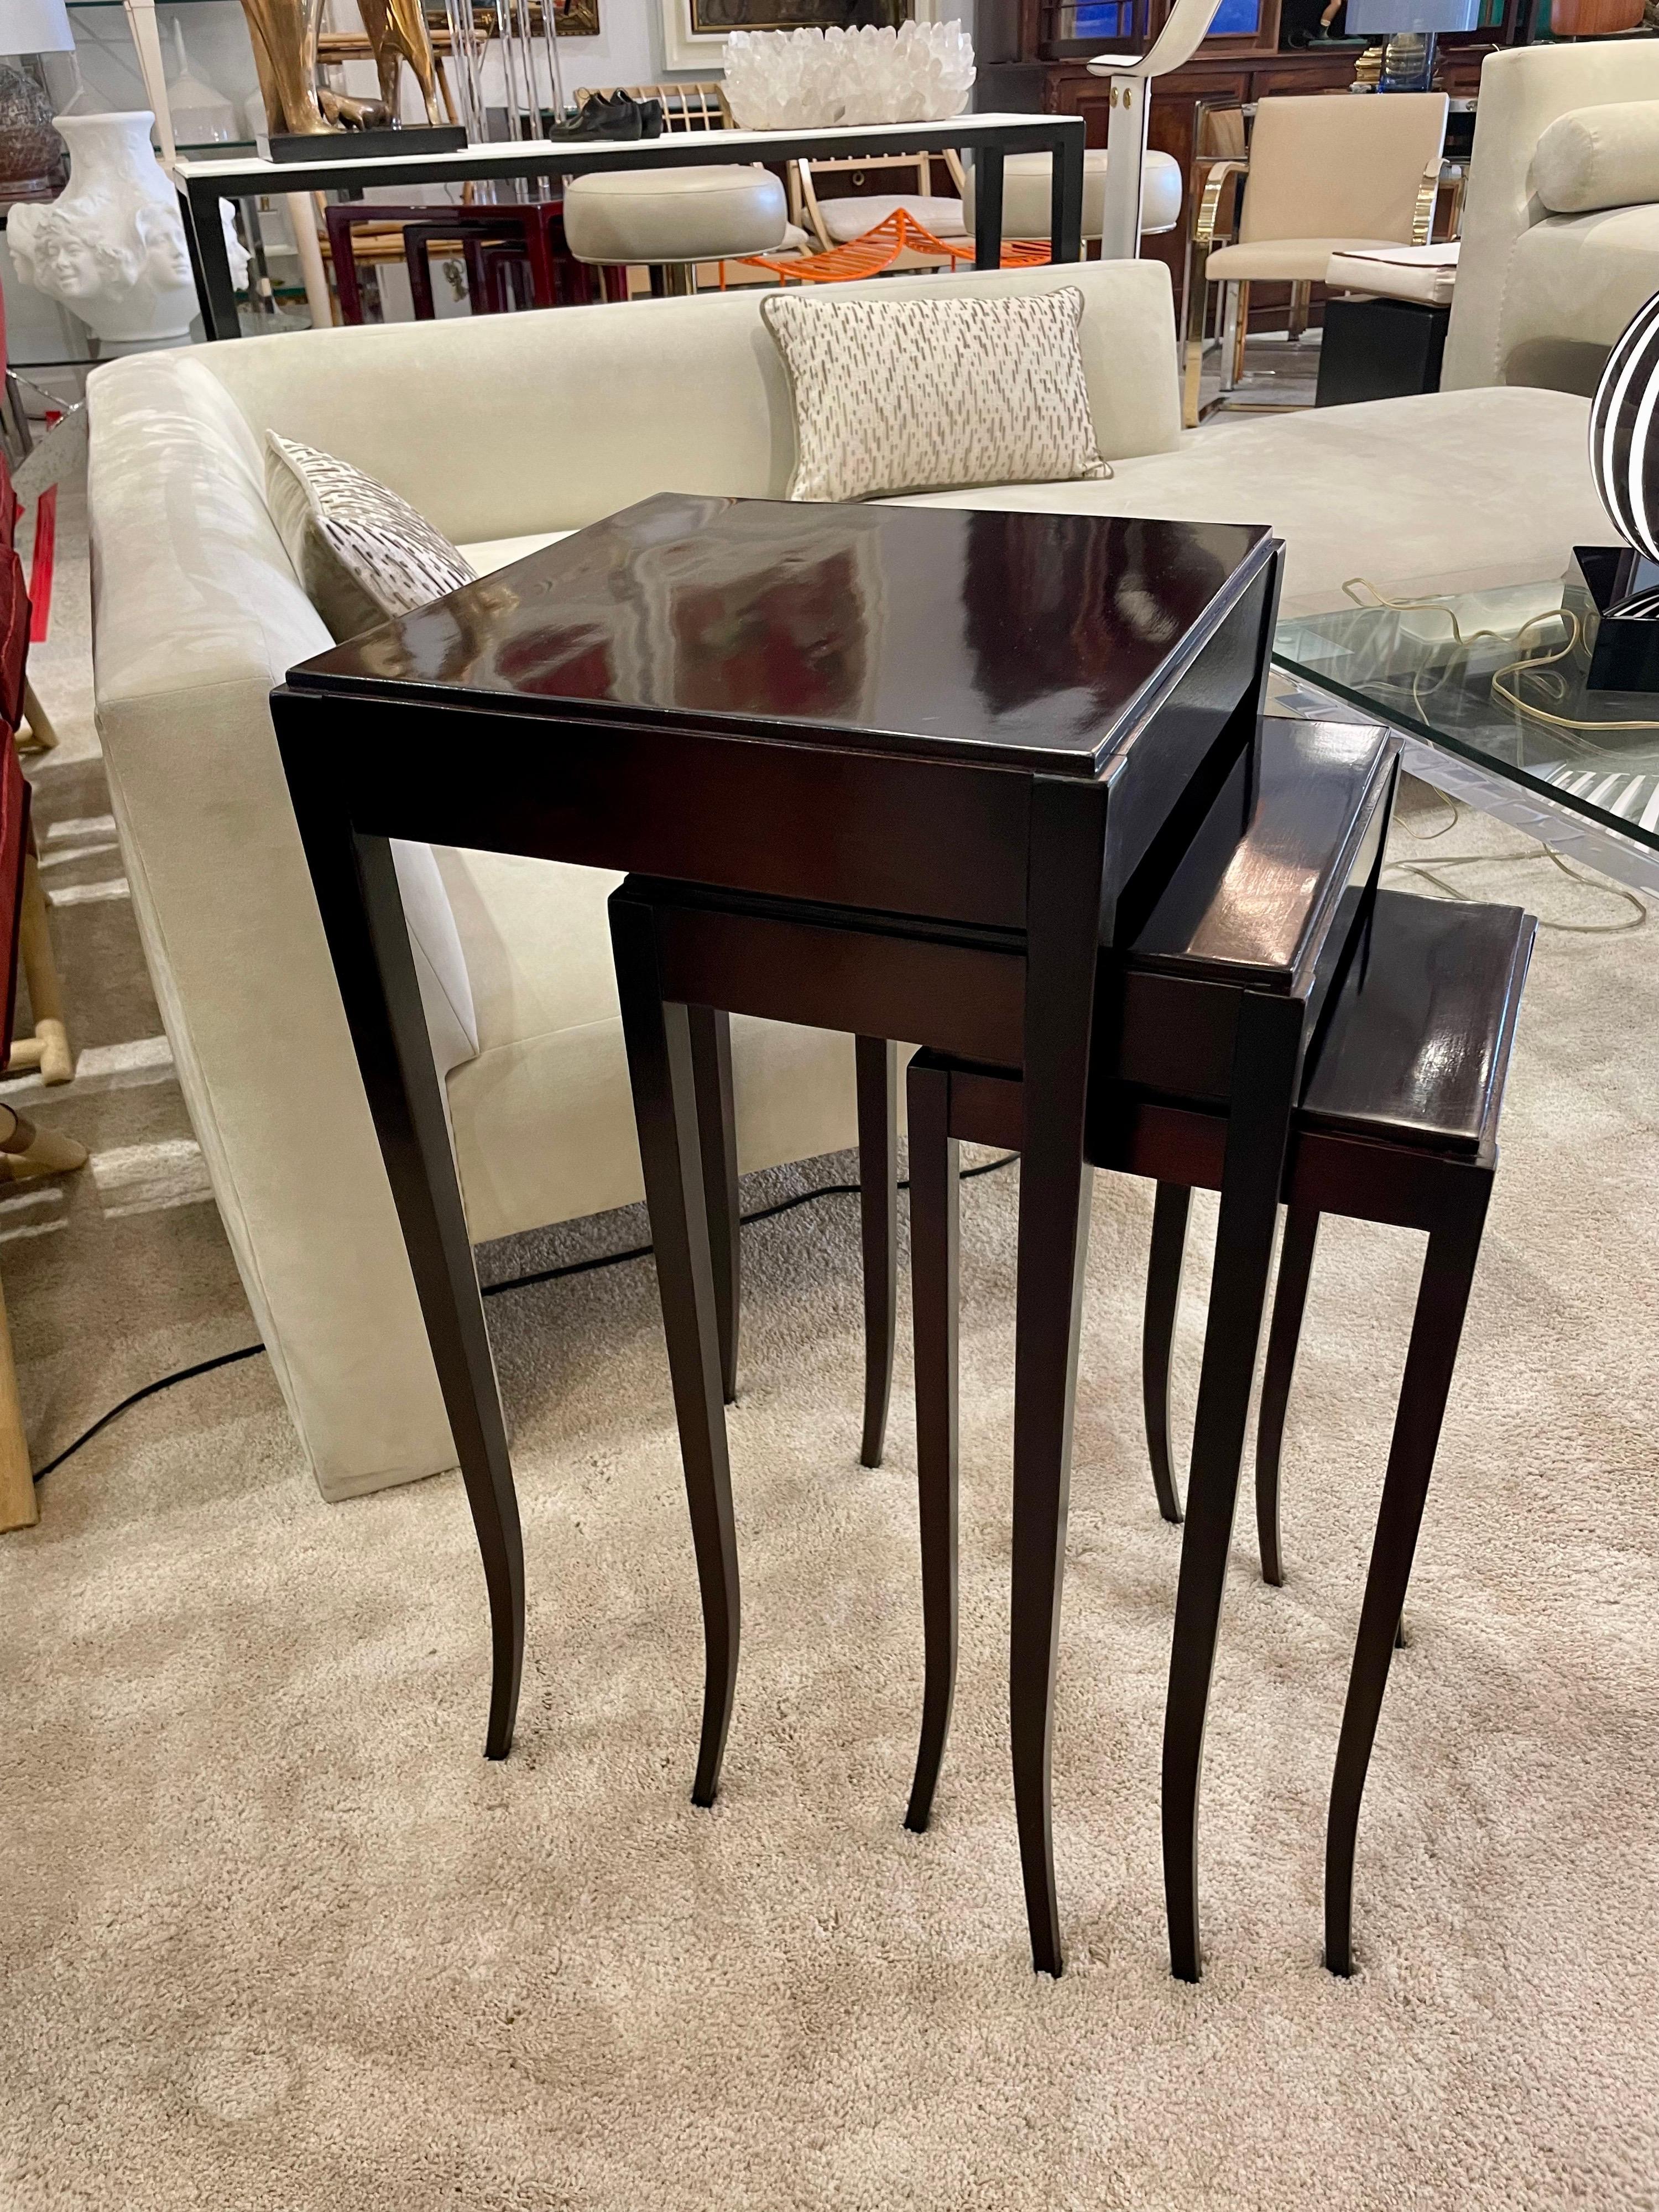 A gorgeous Barbara Barry set of nesting tables w/ splayed legs for Baker Furniture. In a rich dark burnt umber mahogany, this set is in great vintage condition (see ALL detail images). Dimensions of all tables: Large 28.75 inches tall, 14.5 x 14.5